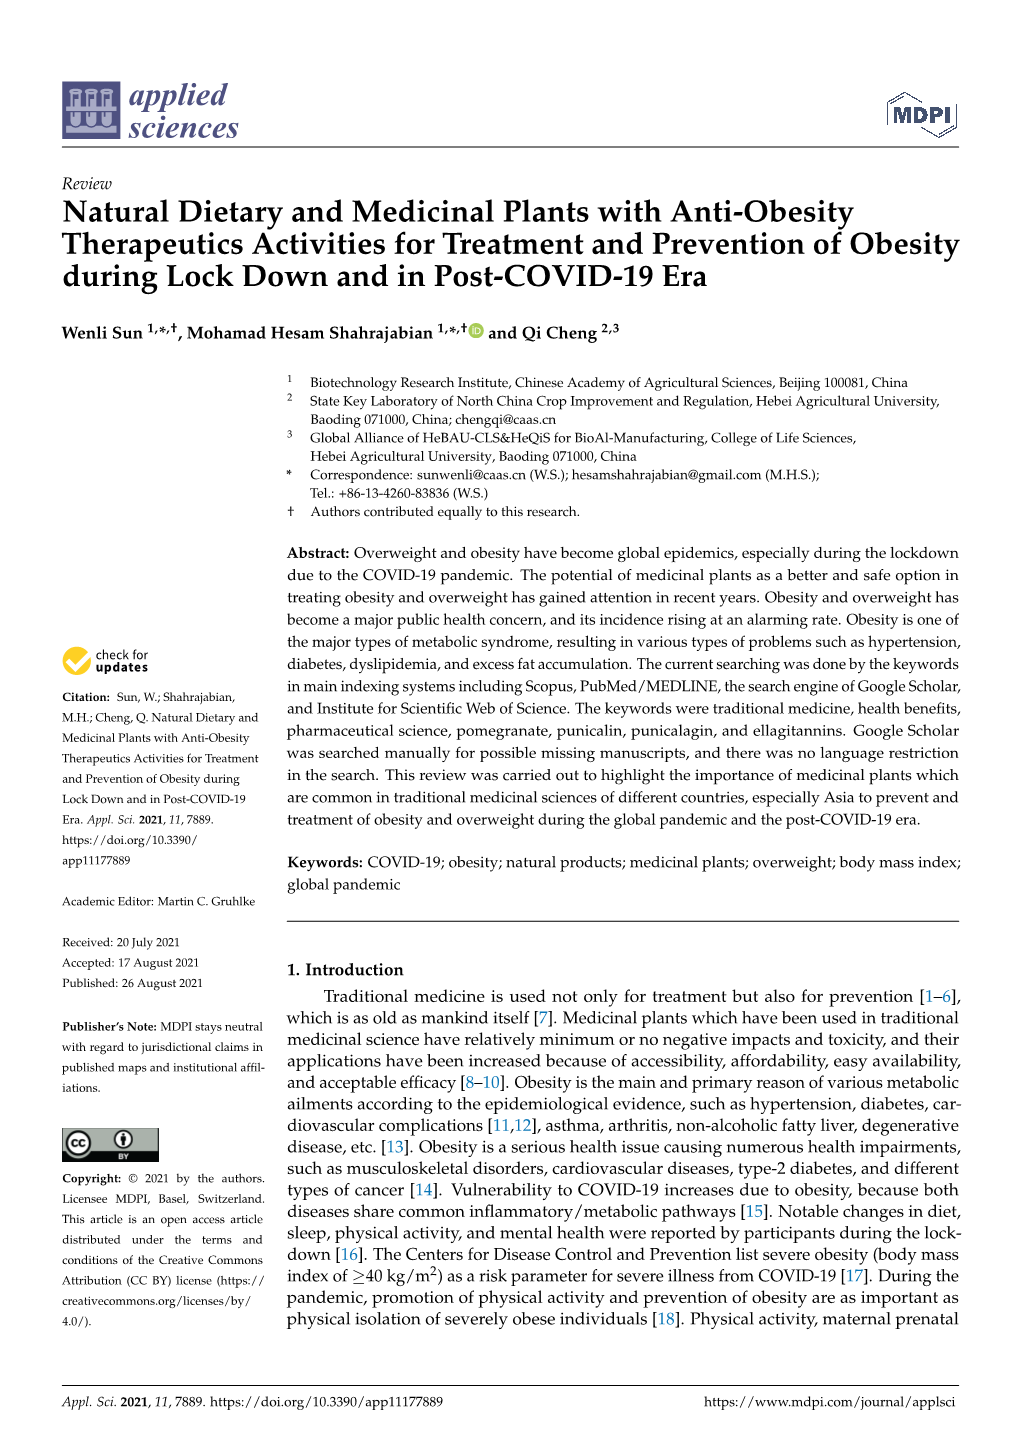 Natural Dietary and Medicinal Plants with Anti-Obesity Therapeutics Activities for Treatment and Prevention of Obesity During Lock Down and in Post-COVID-19 Era